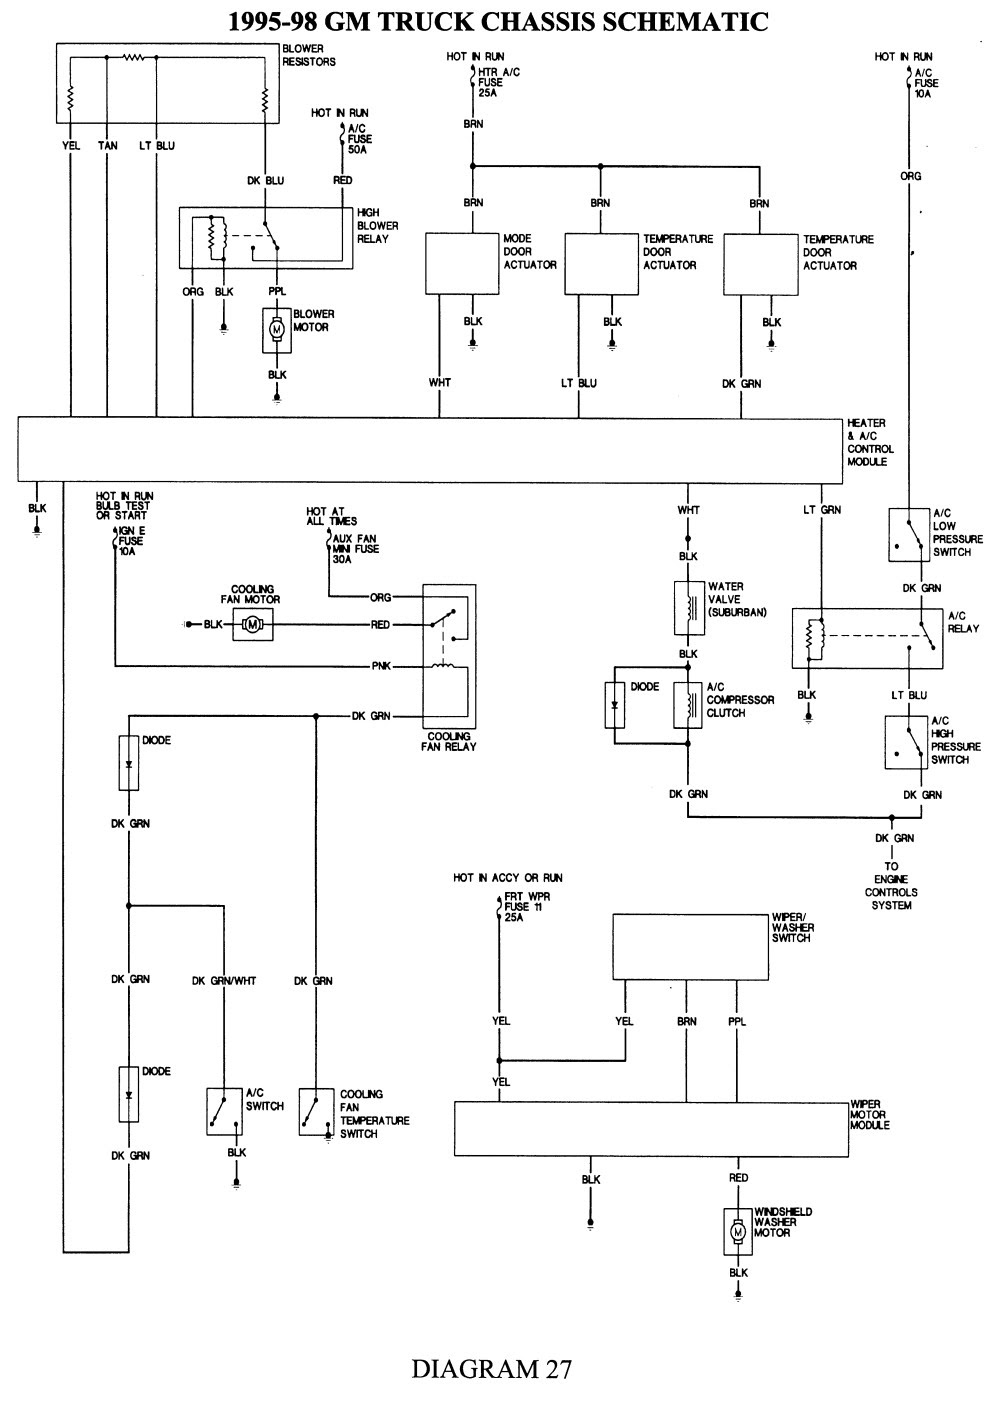 98 Chevy S10 Wiring Diagram - Wiring Diagram Networks